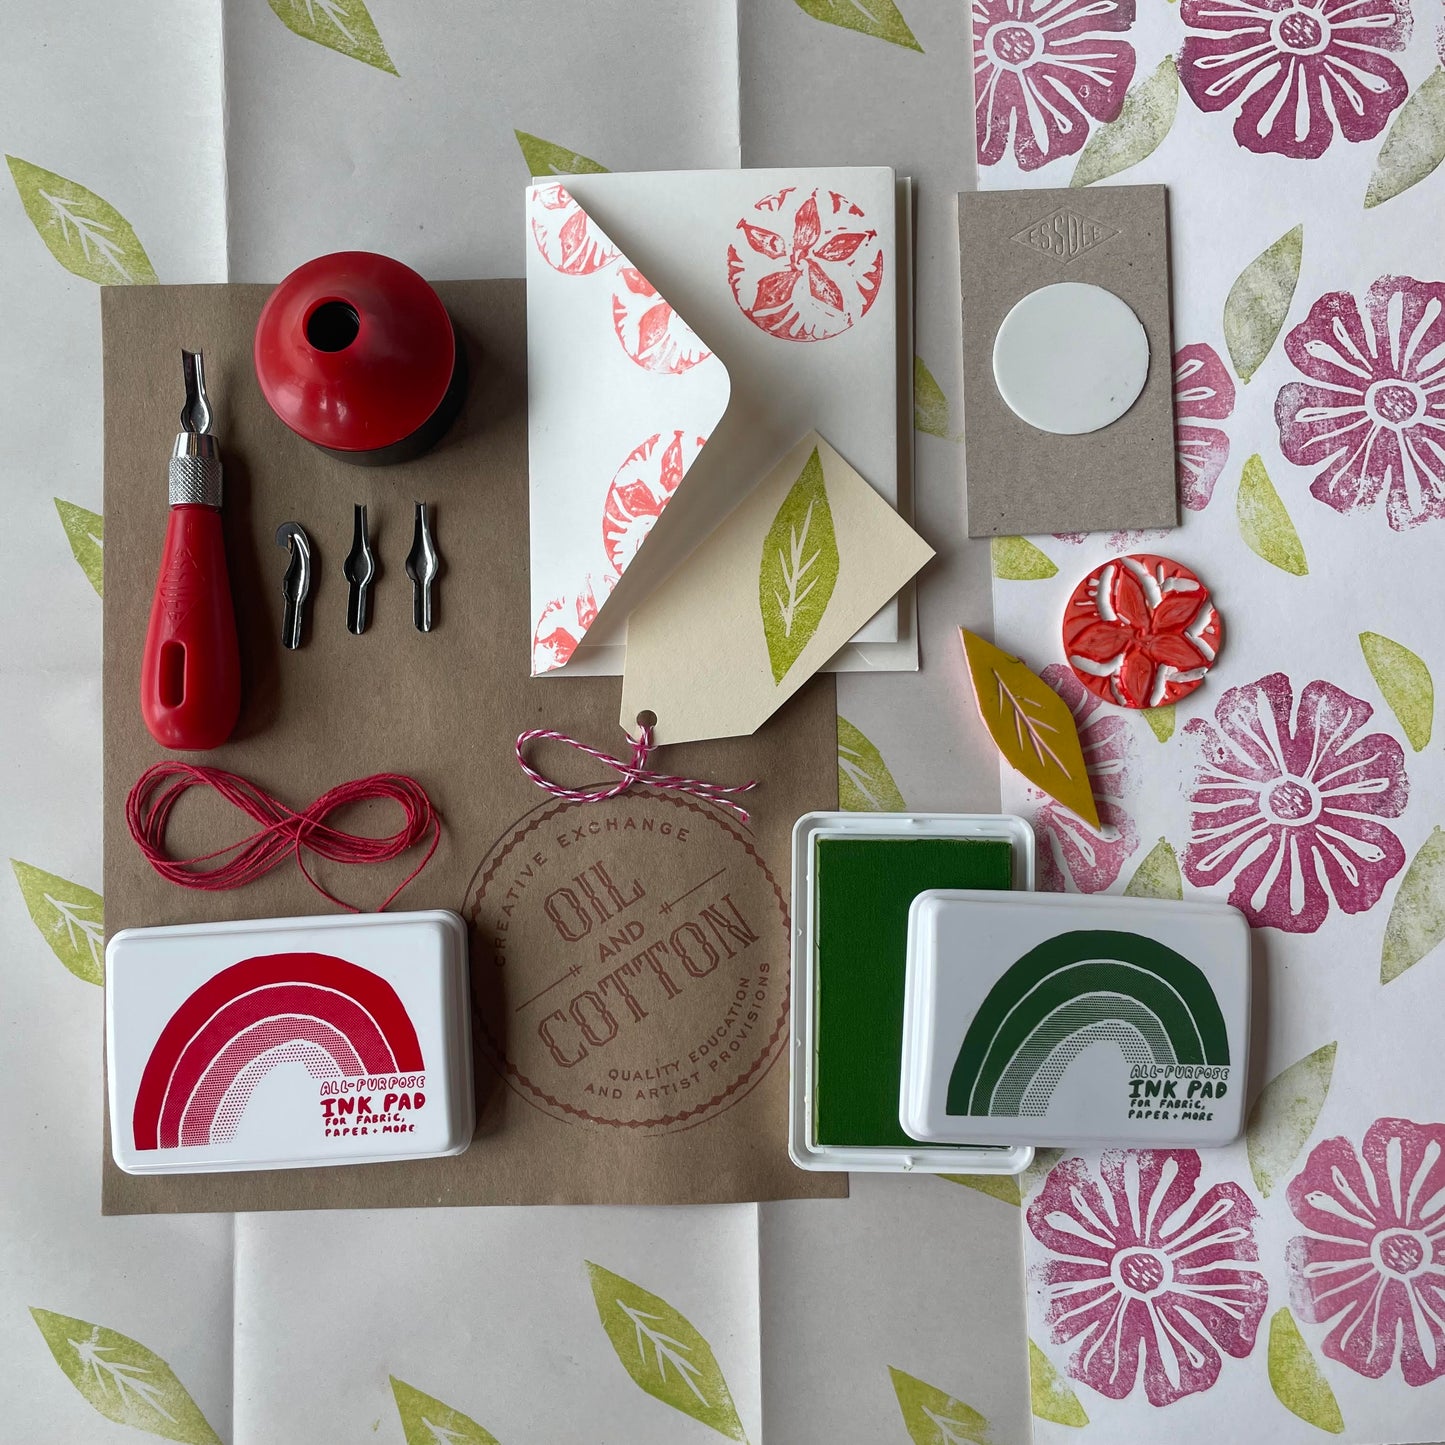 Capital One Kit: Block Printing Holiday Cards with Kenya Diaz of Oil and Cotton